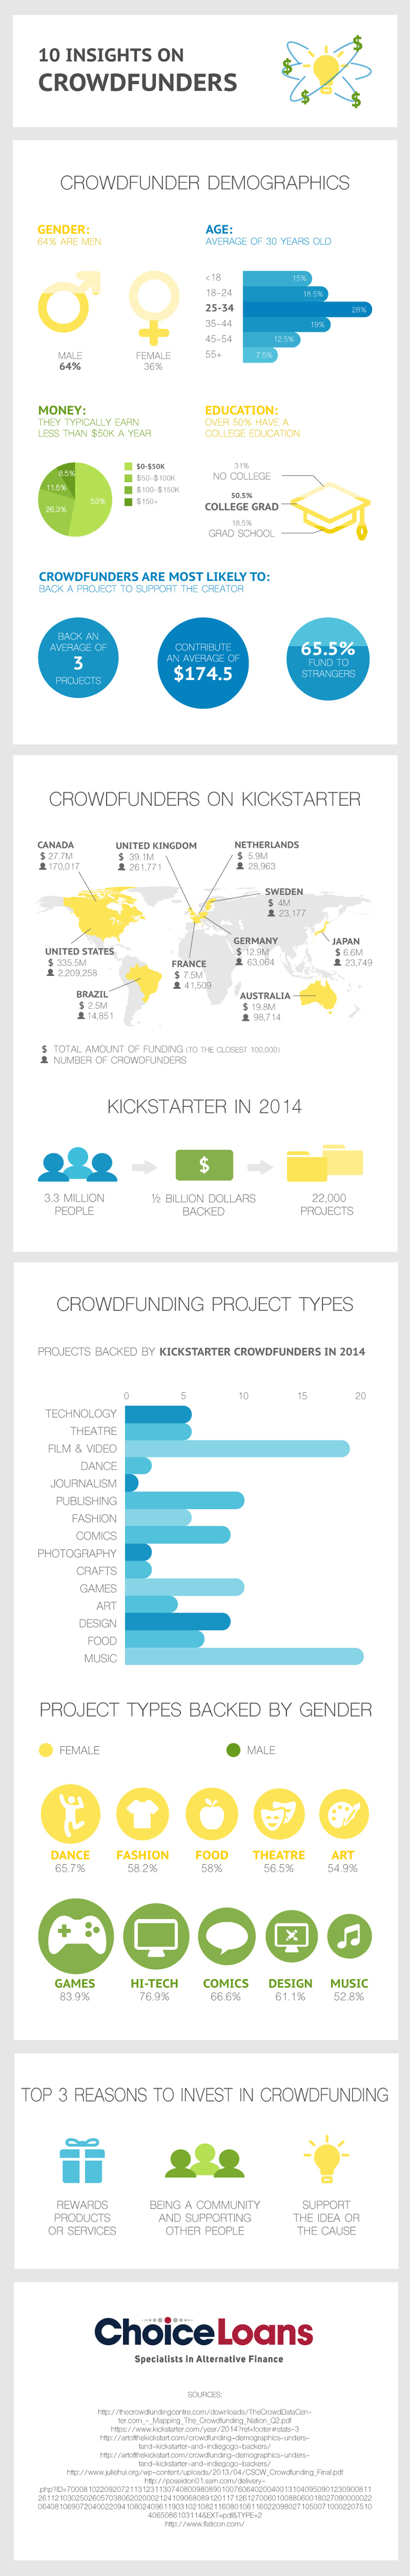 10 Insights on Crowdfunders